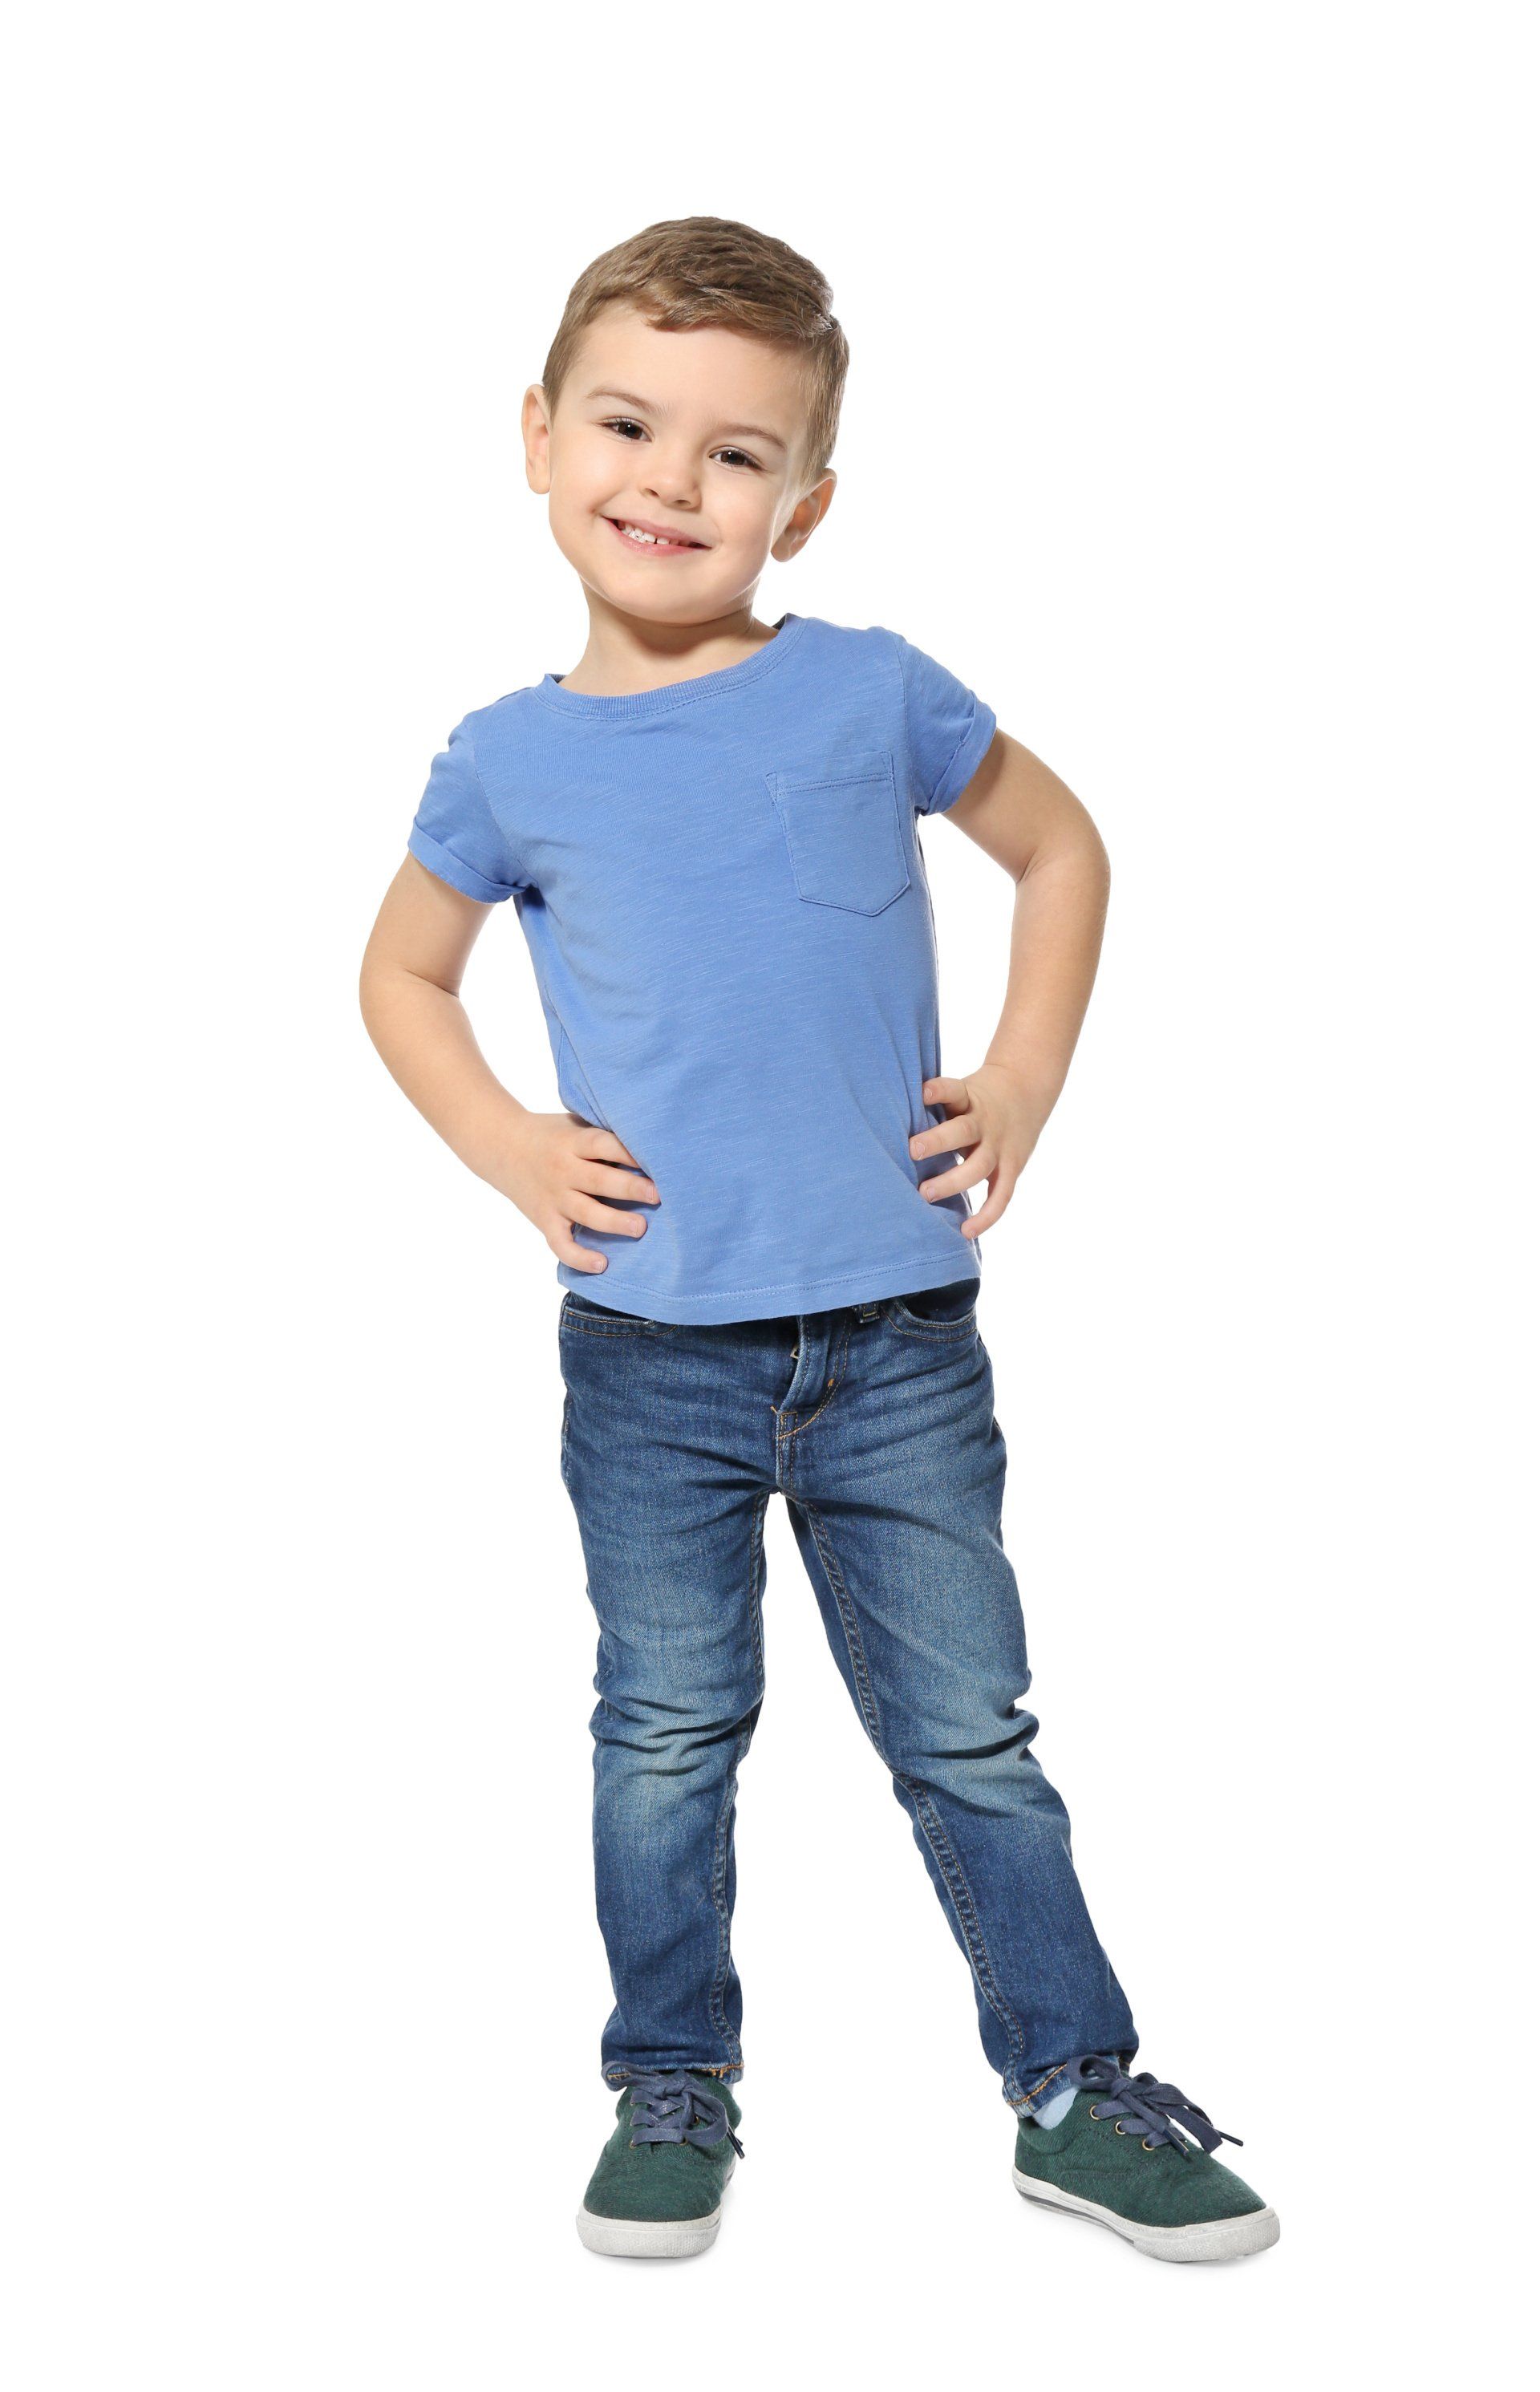 cute little boy standing with hands on hips